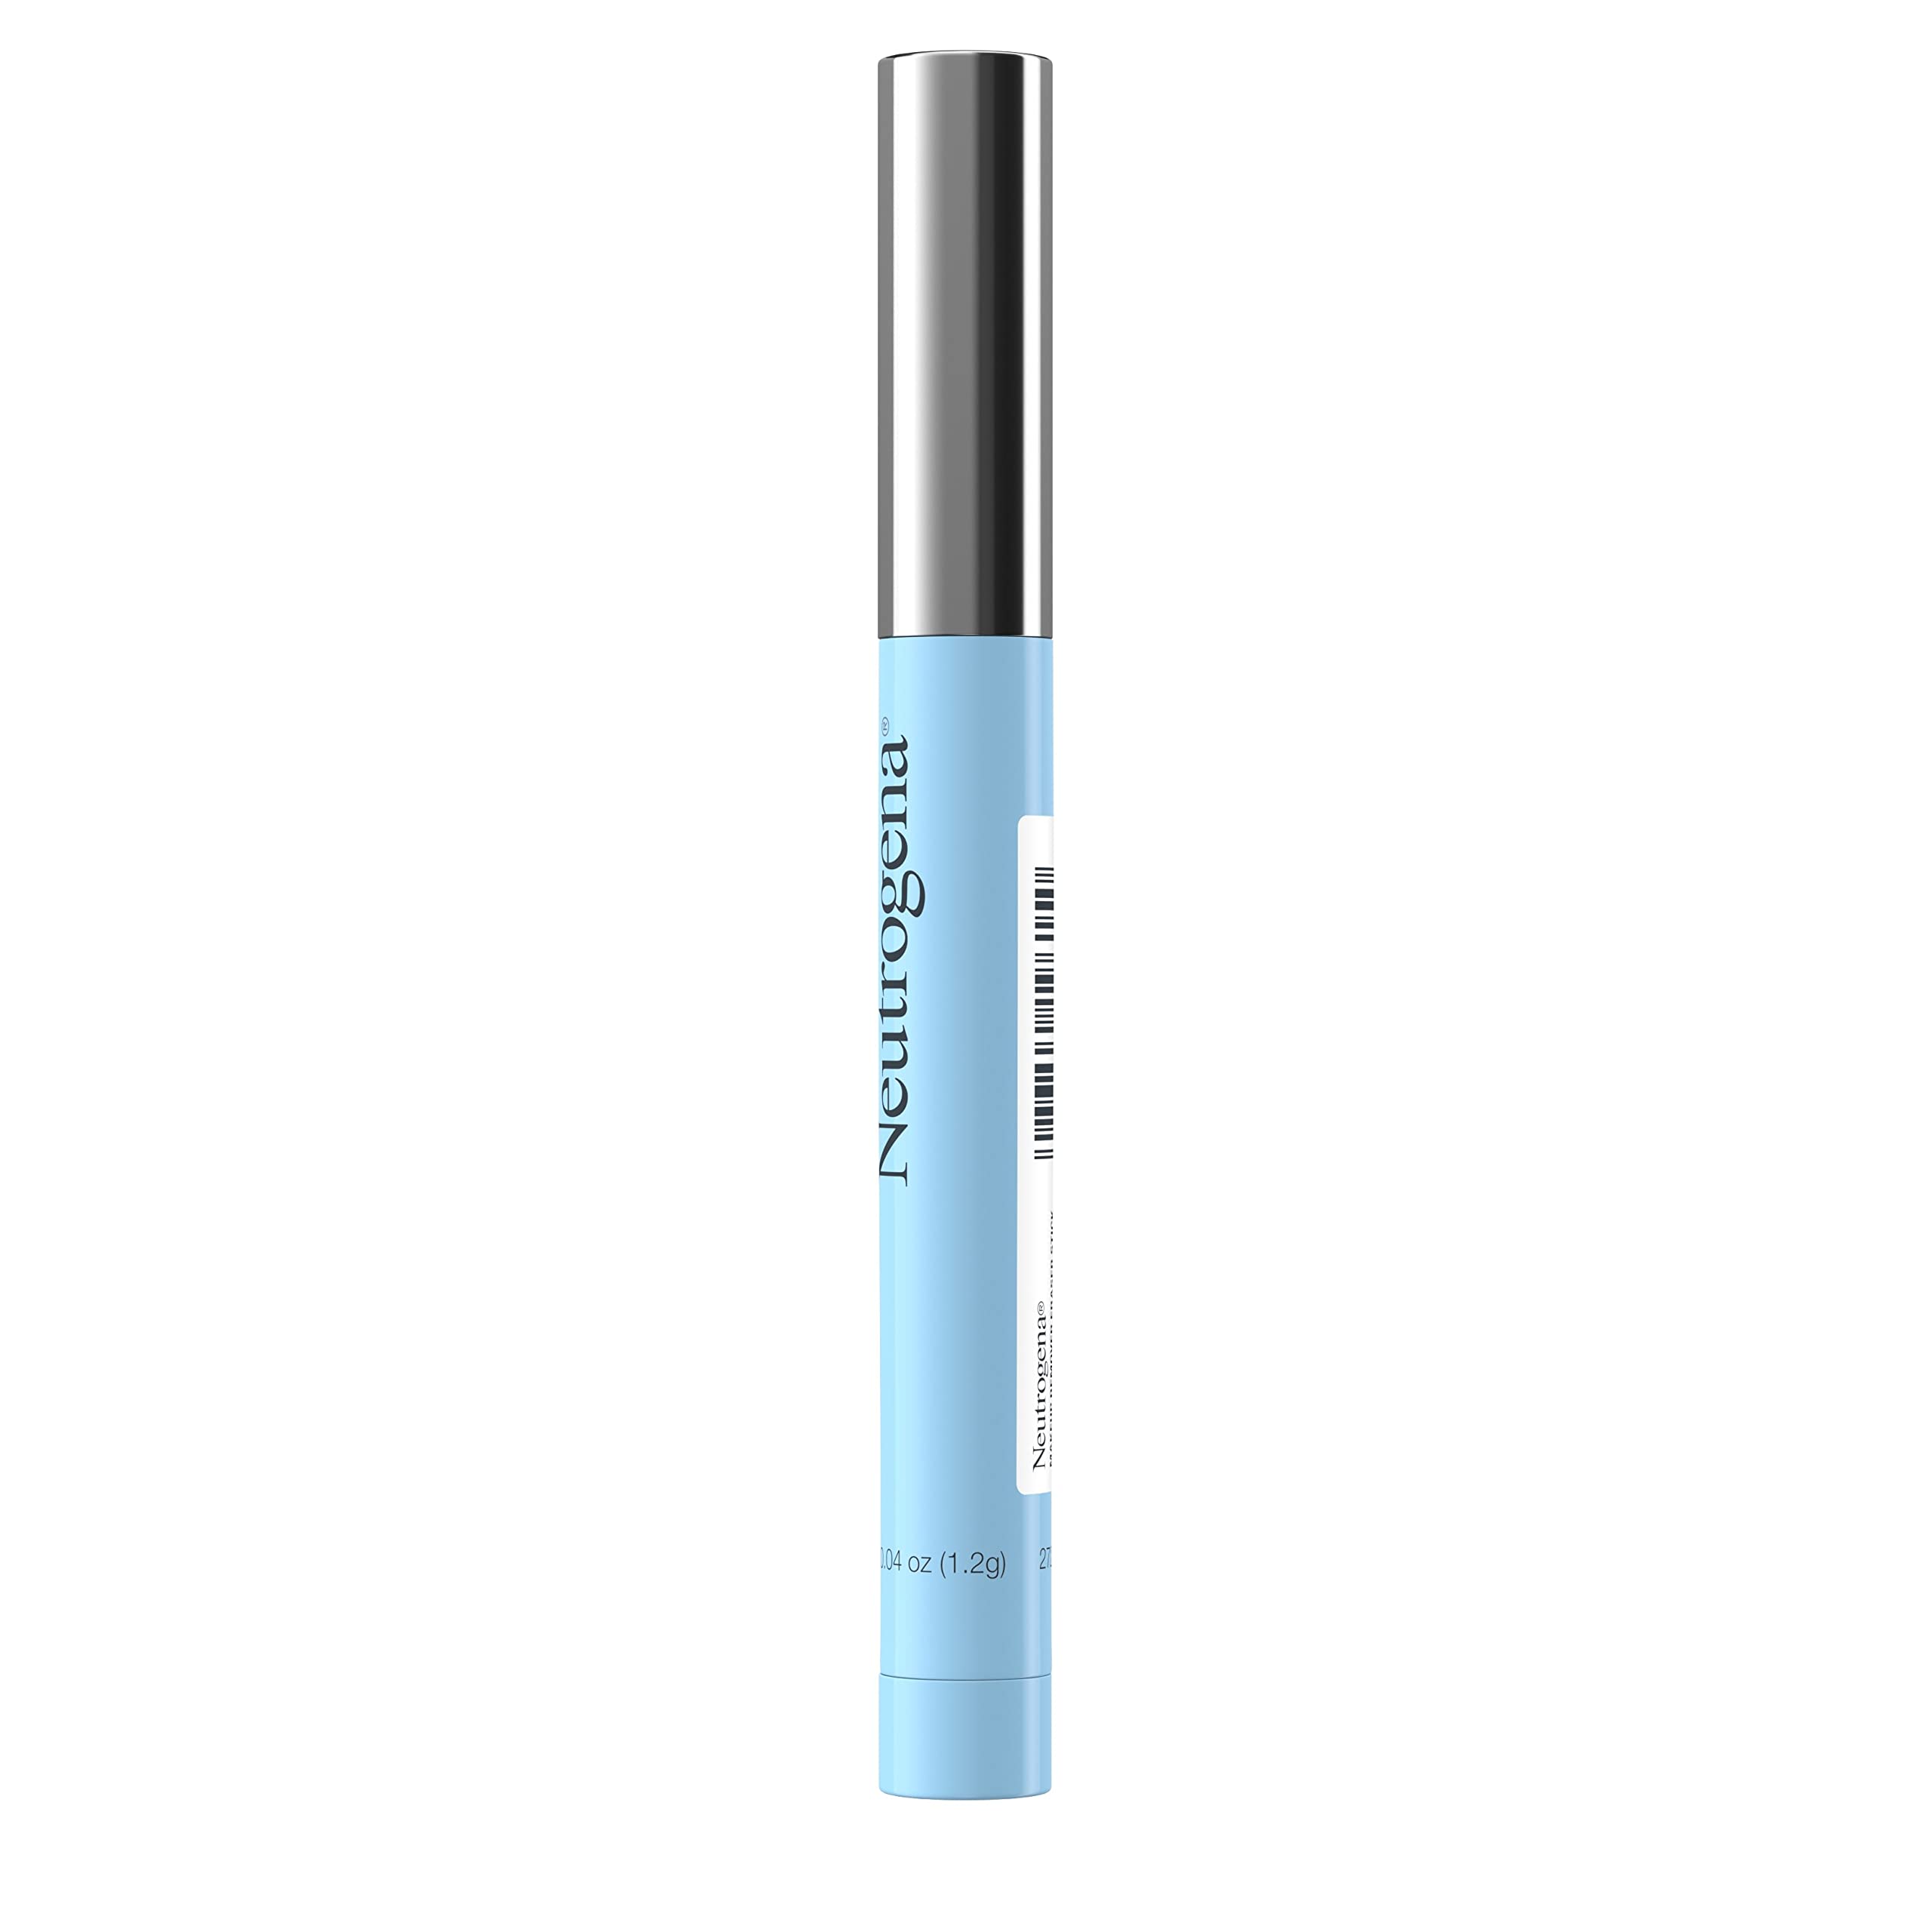 Neutrogena Makeup Remover Eraser Stick with Vitamin E, Easy-to Use & Travel-Friendly Makeup Removing Gel Pen for On-the-Go Touch-Ups of Stray or Smudged Eyeliner, Lipstick, & More, 0.04 oz